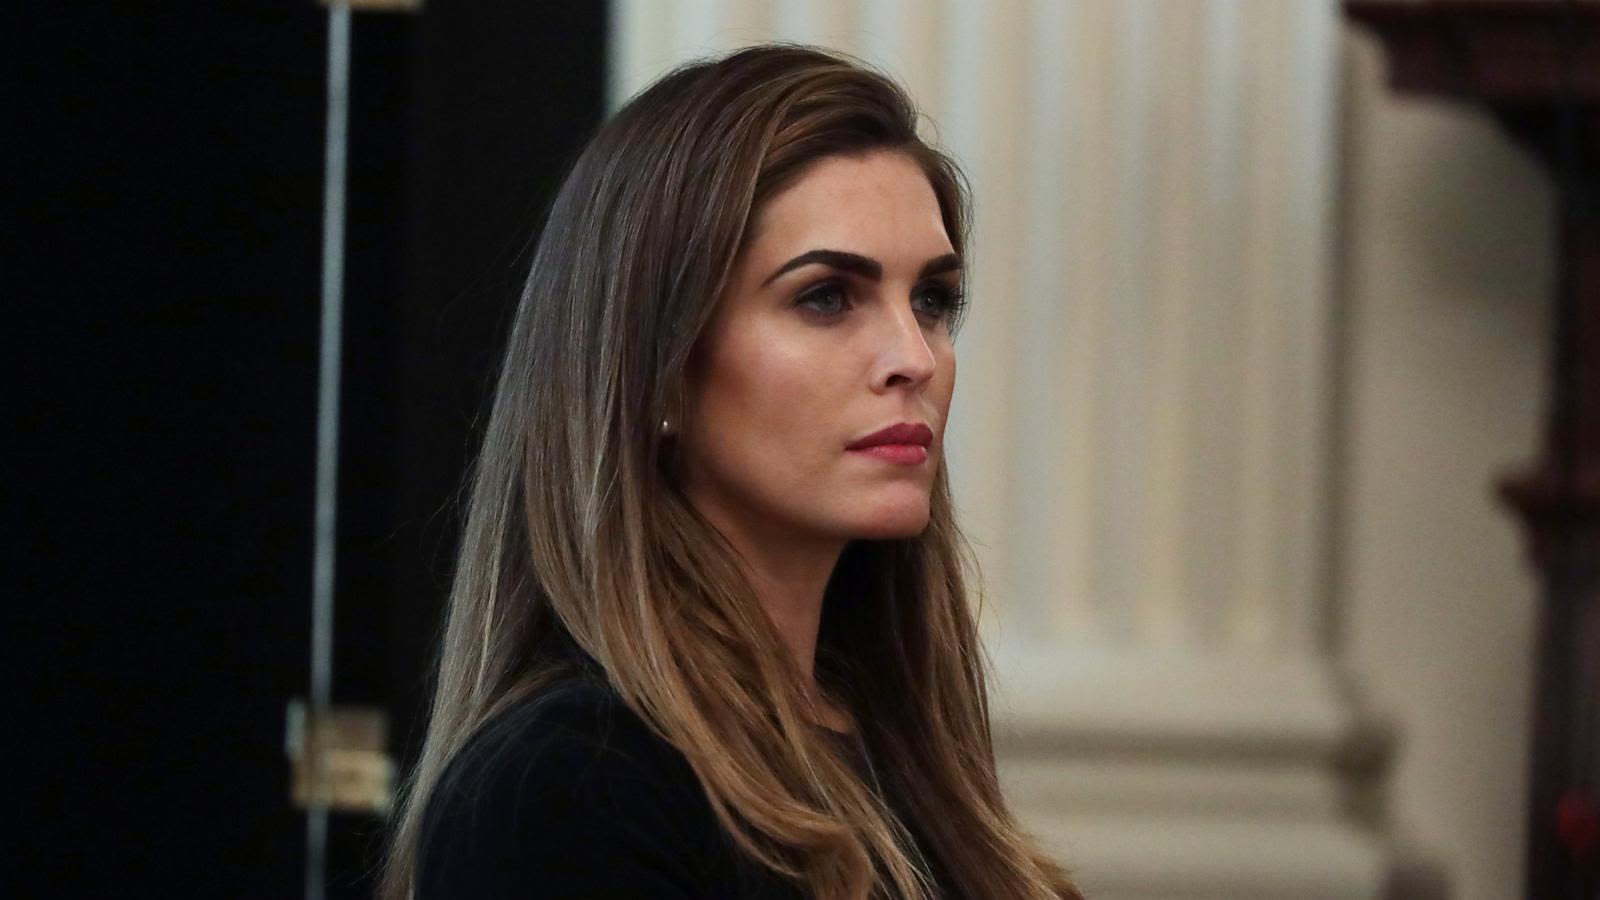 Trump trial live updates: Hope Hicks was 'very concerned' about 'Access Hollywood' tape